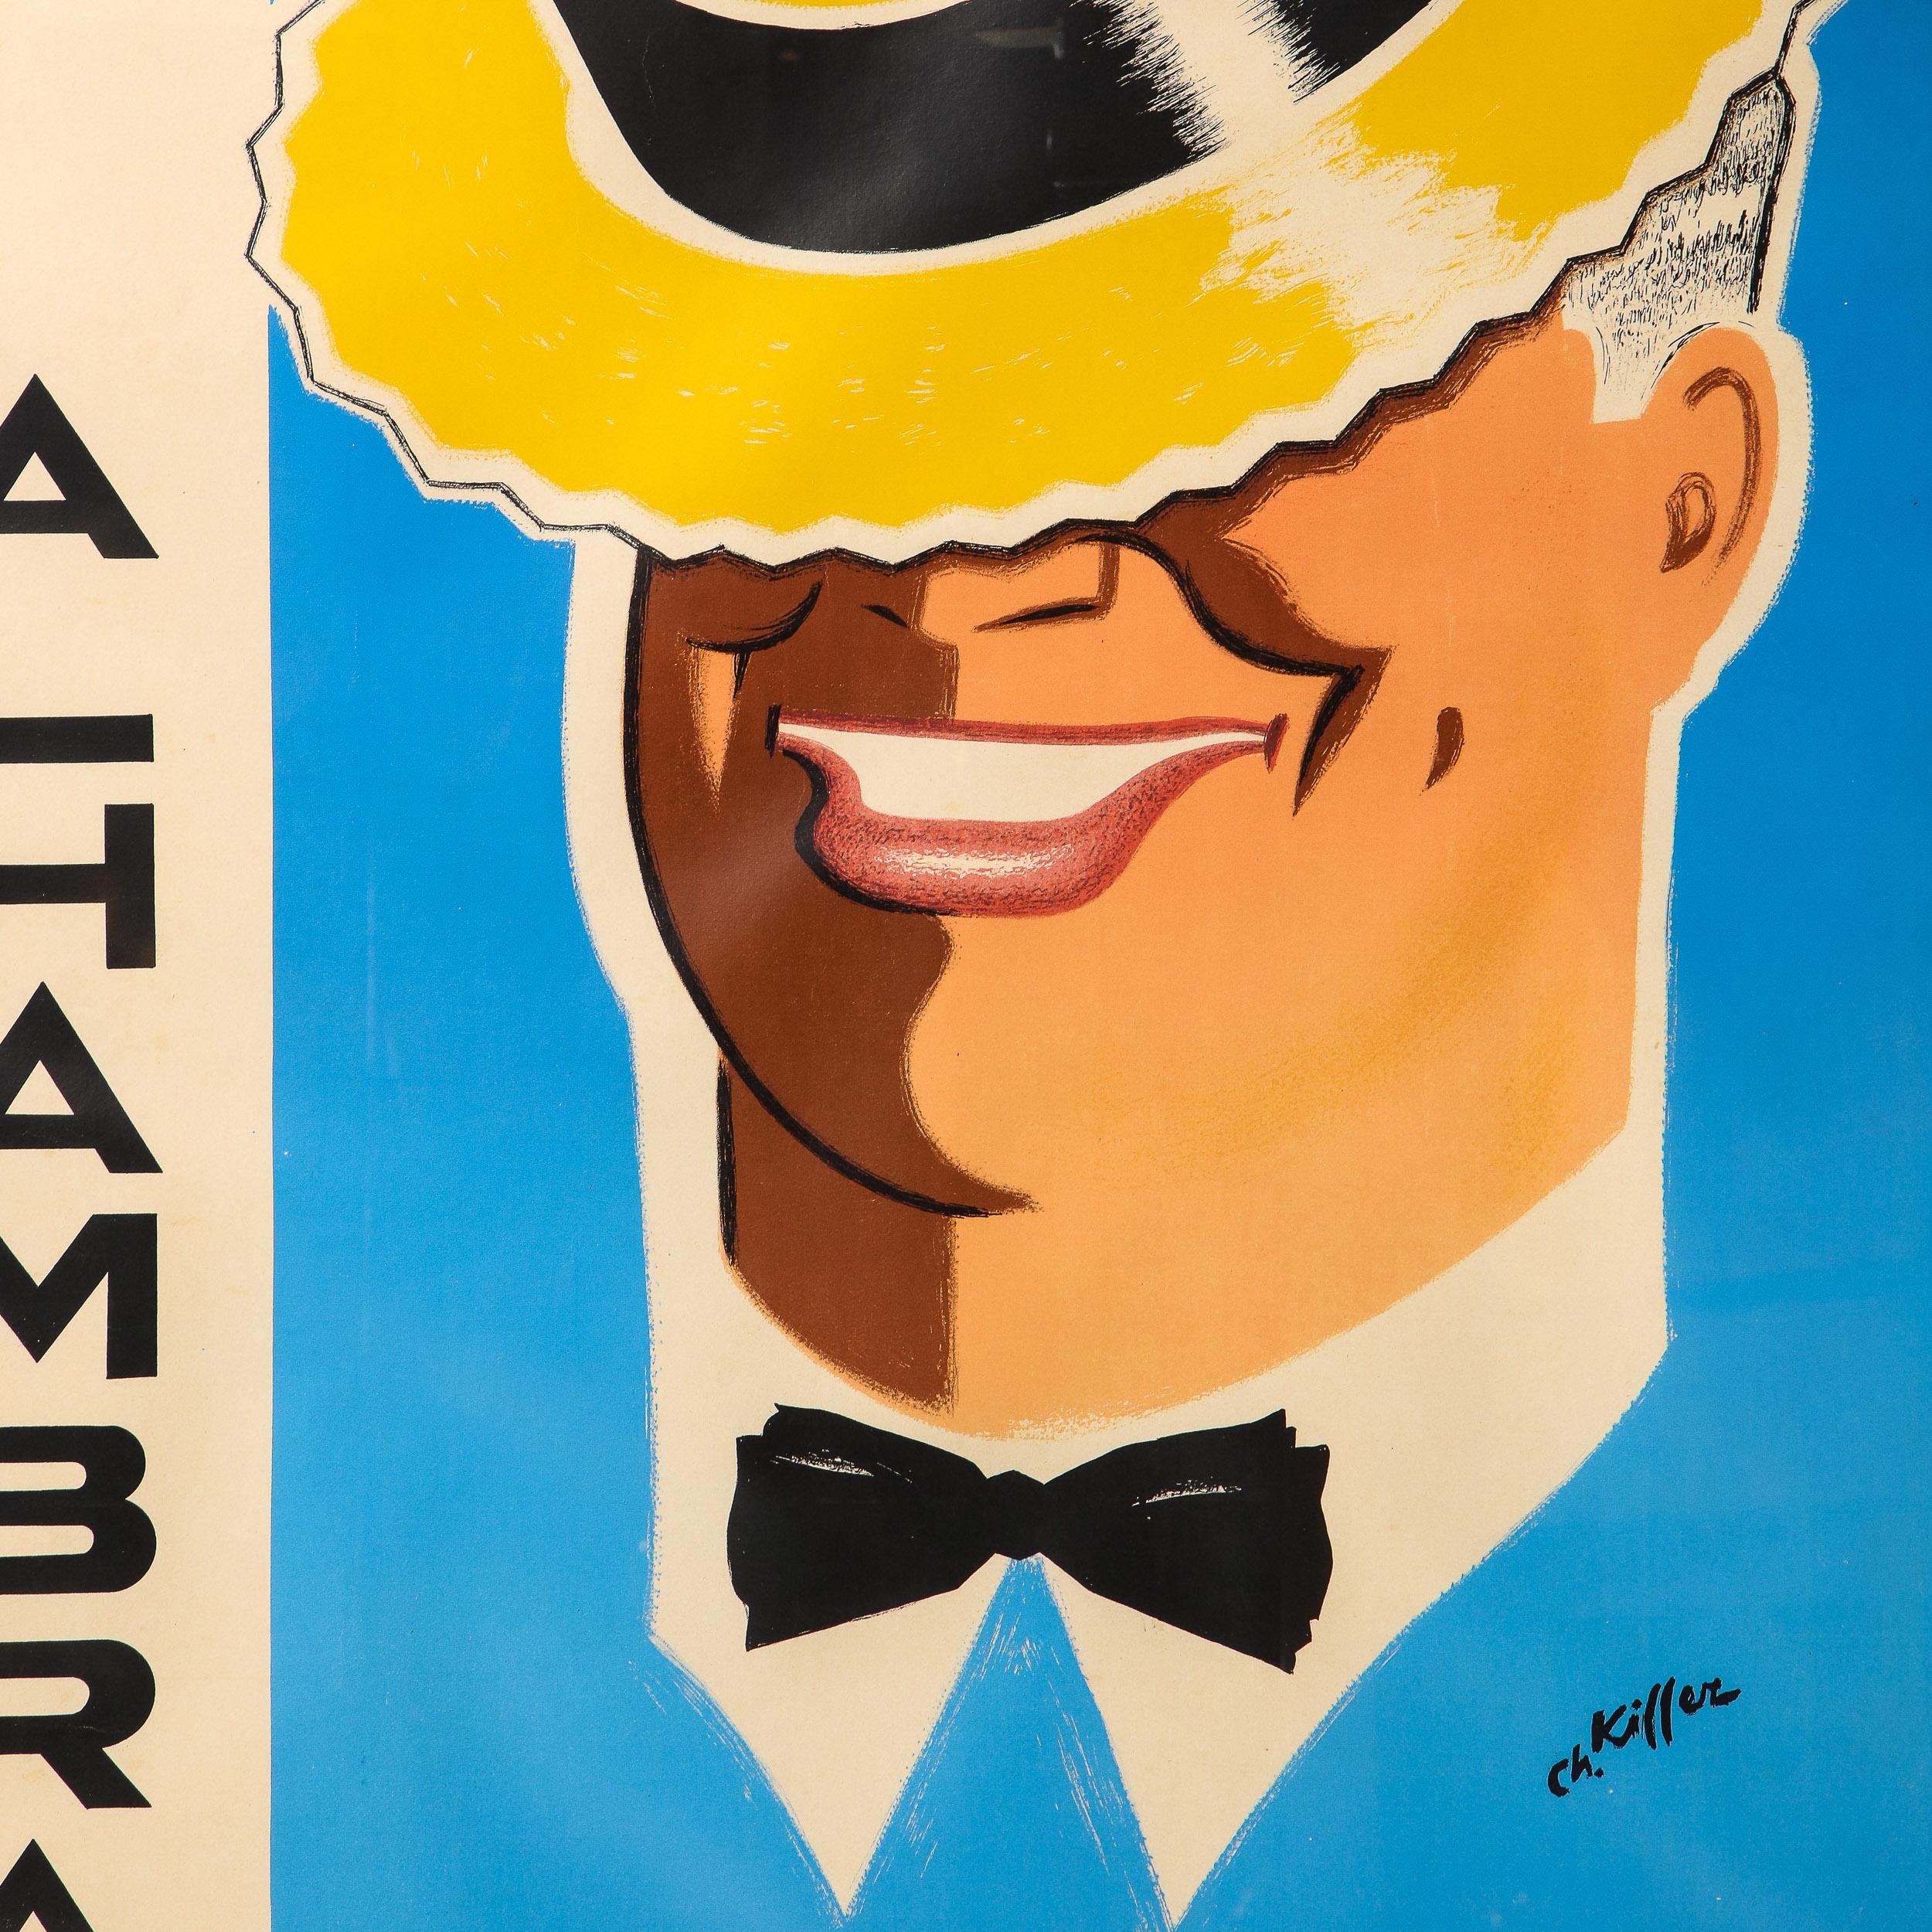 This beautiful original Mid-Century Modern lithograph was created for the inauguration of the new Alhambra Theater, featuring Maurice Chevalier, circa 1948. It features the actor donning a black bow tie with a brimmed straw hat tilted covering most